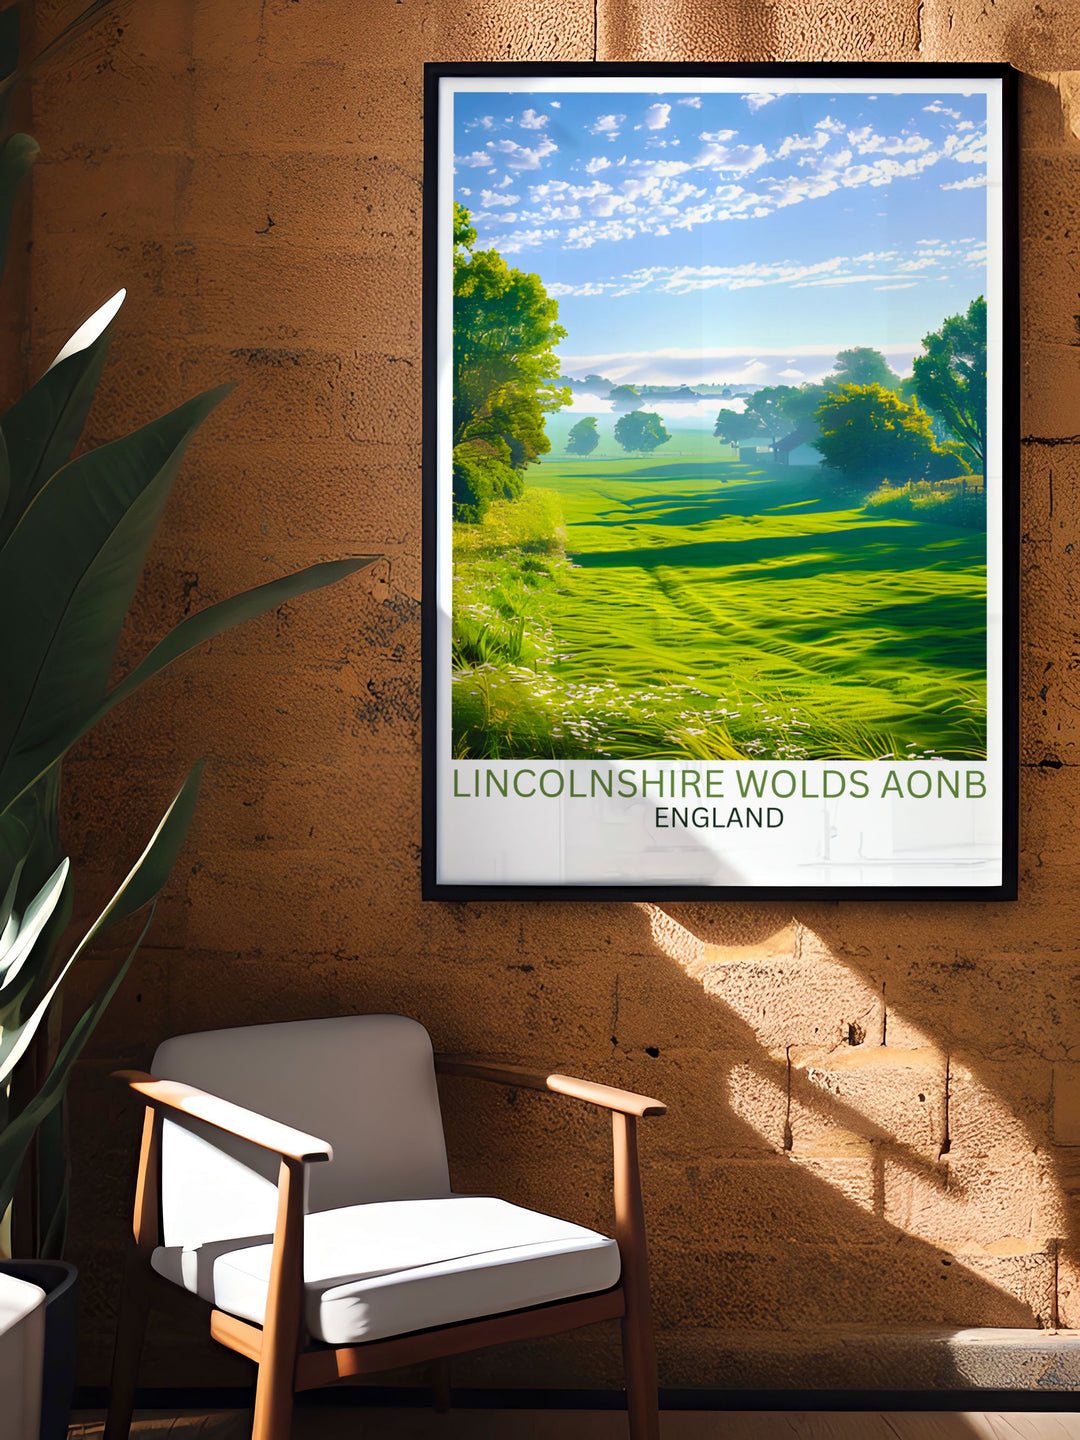 Vintage inspired art showcasing the heritage and beauty of rural England, suitable for adding a historical dimension to your decor.